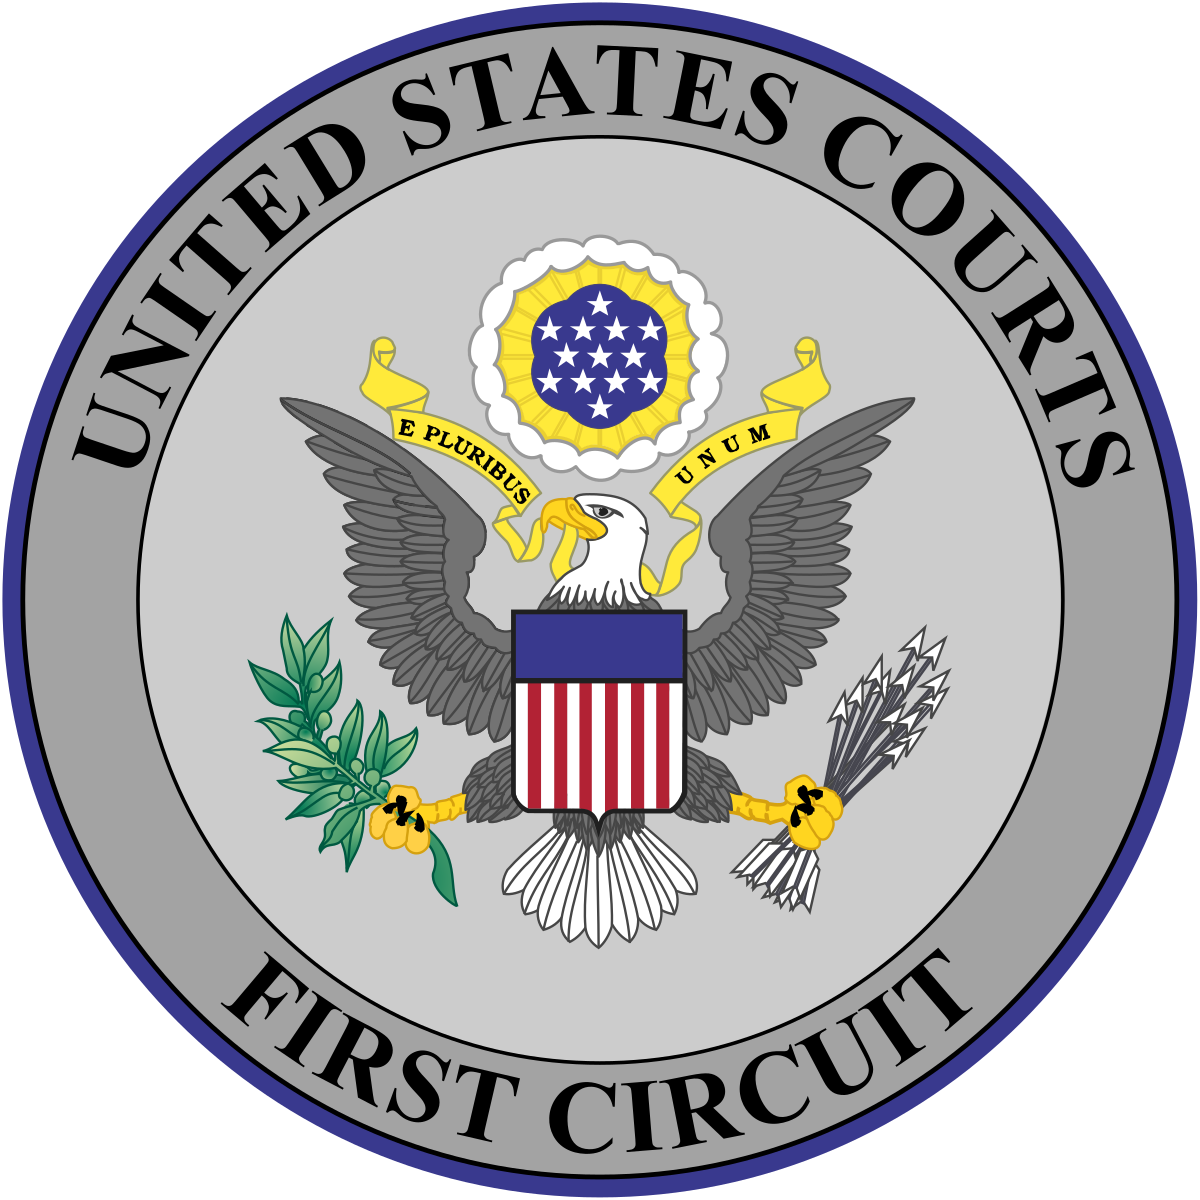 1200px-Seal_of_the_United_States_Court_of_Appeals_for_the_First_Circuit.svg.png